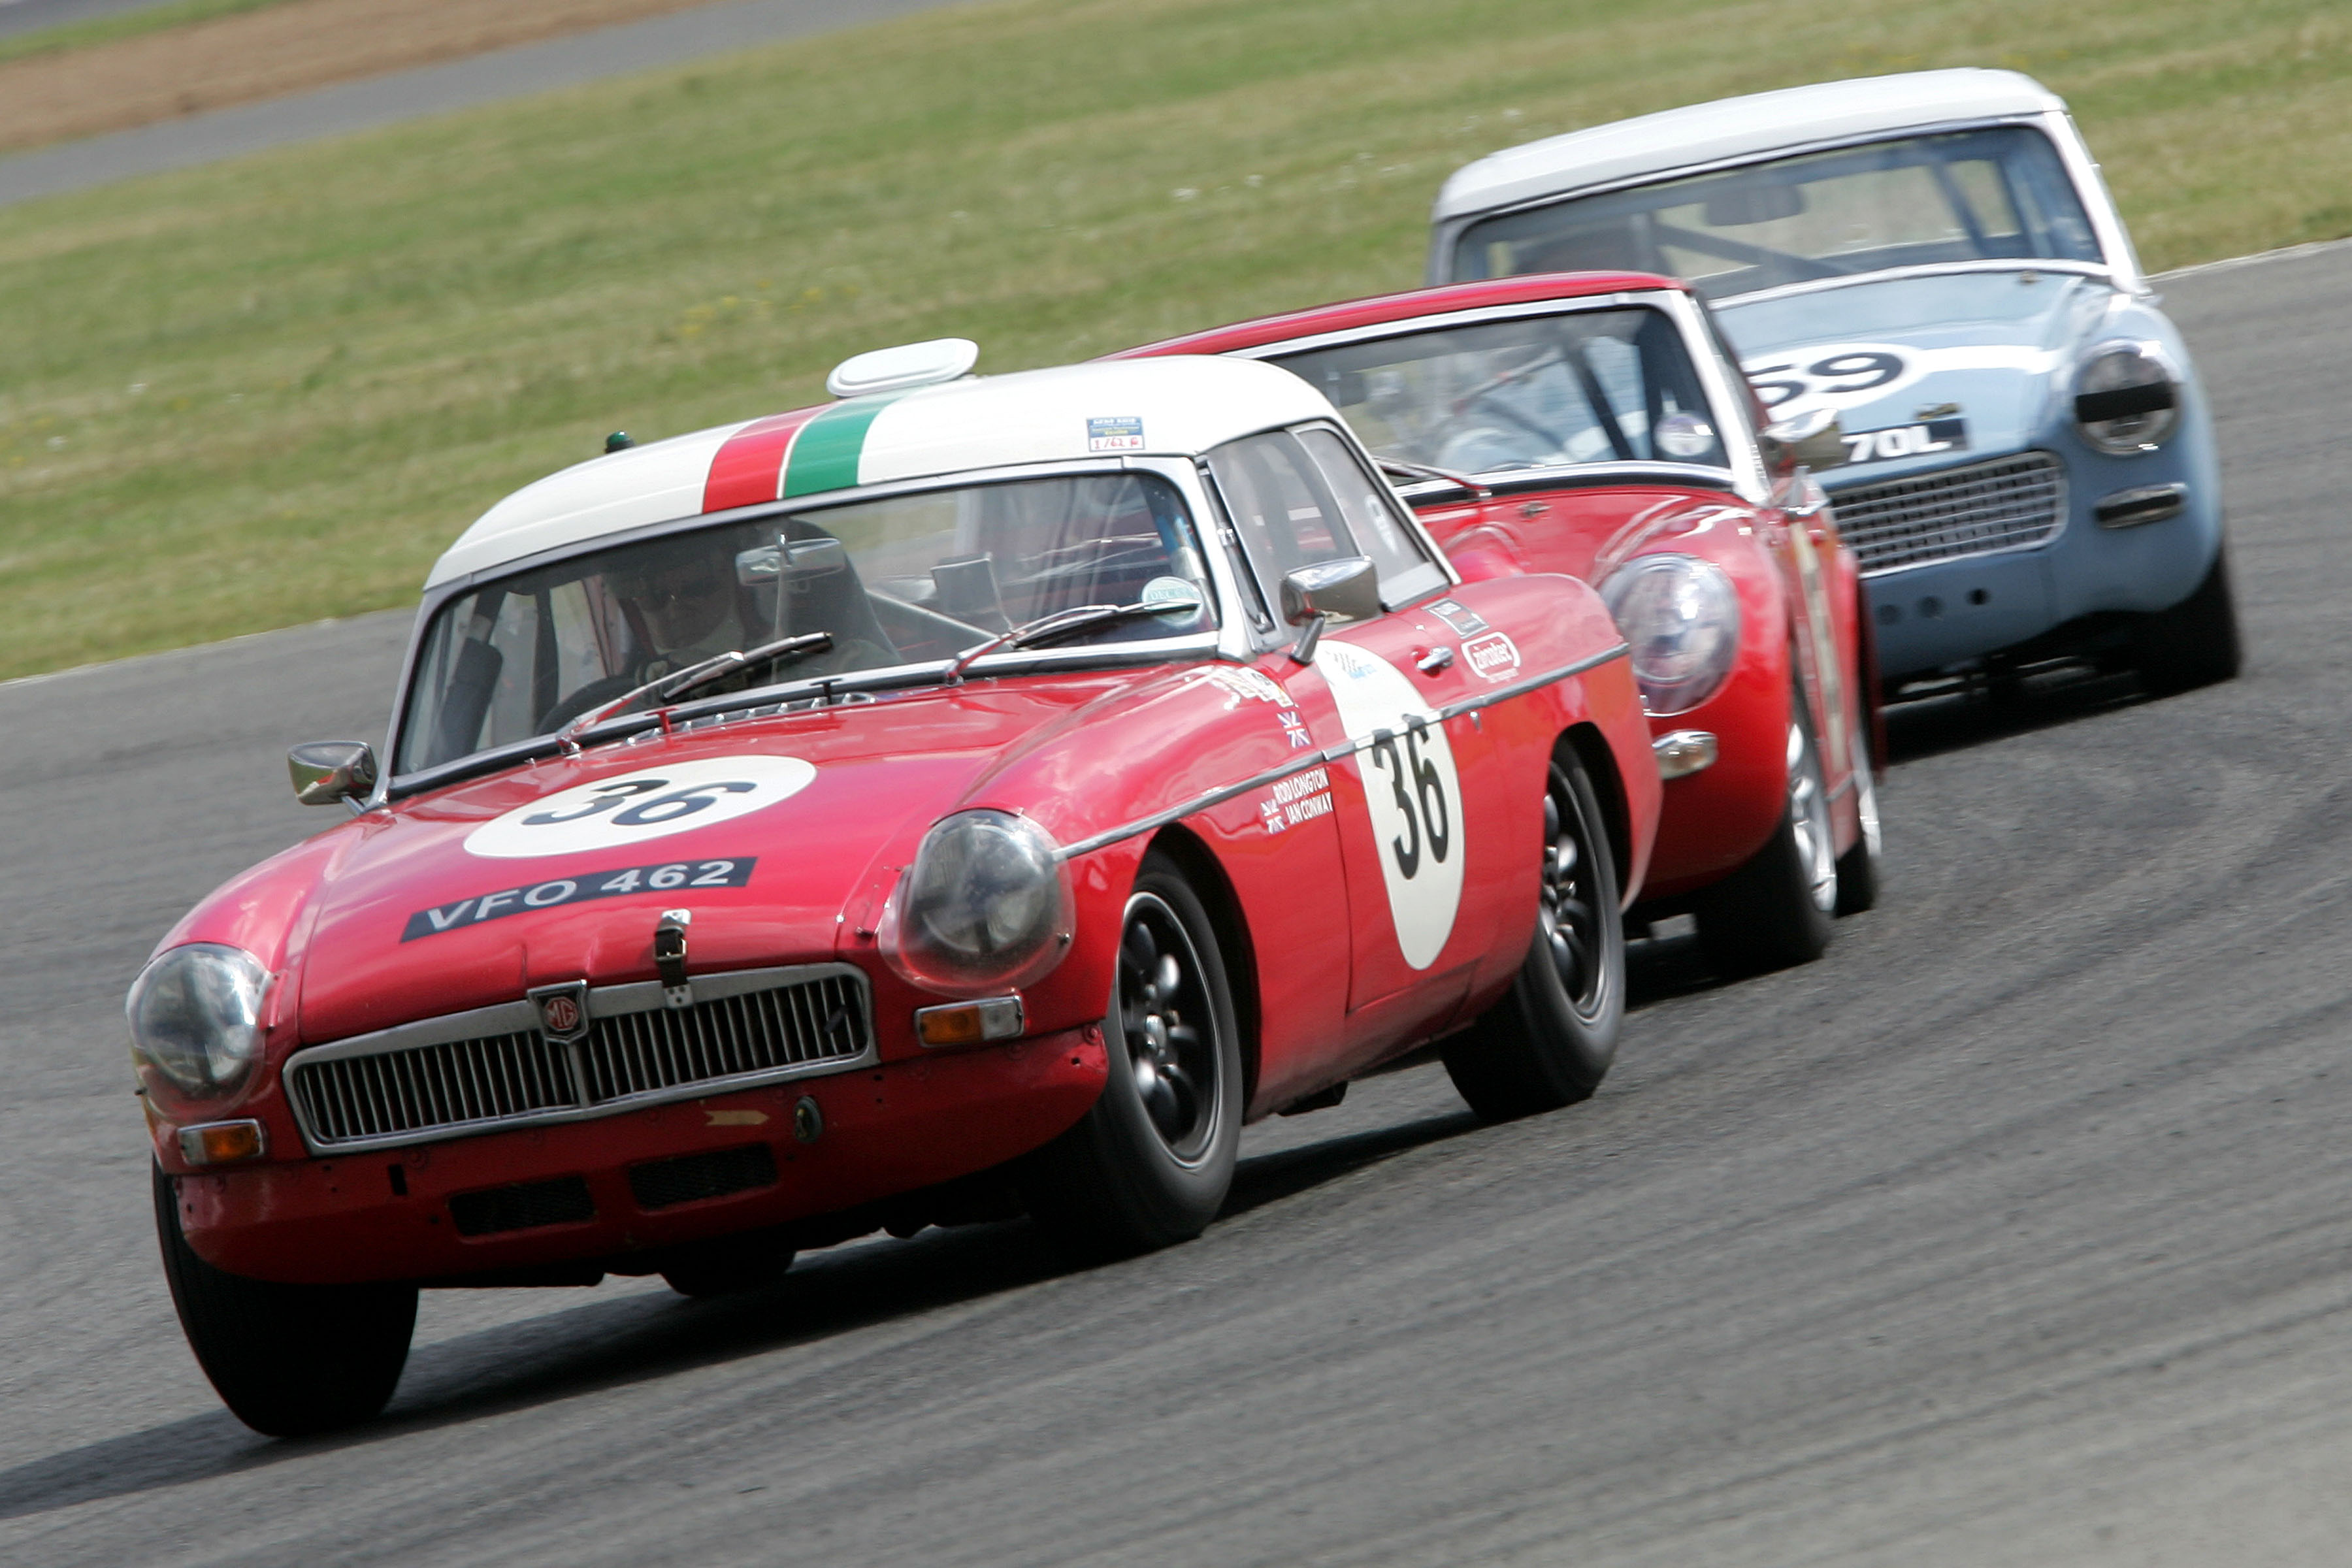 Low-cost ways are available to go vintage racing | ClassicCars.com